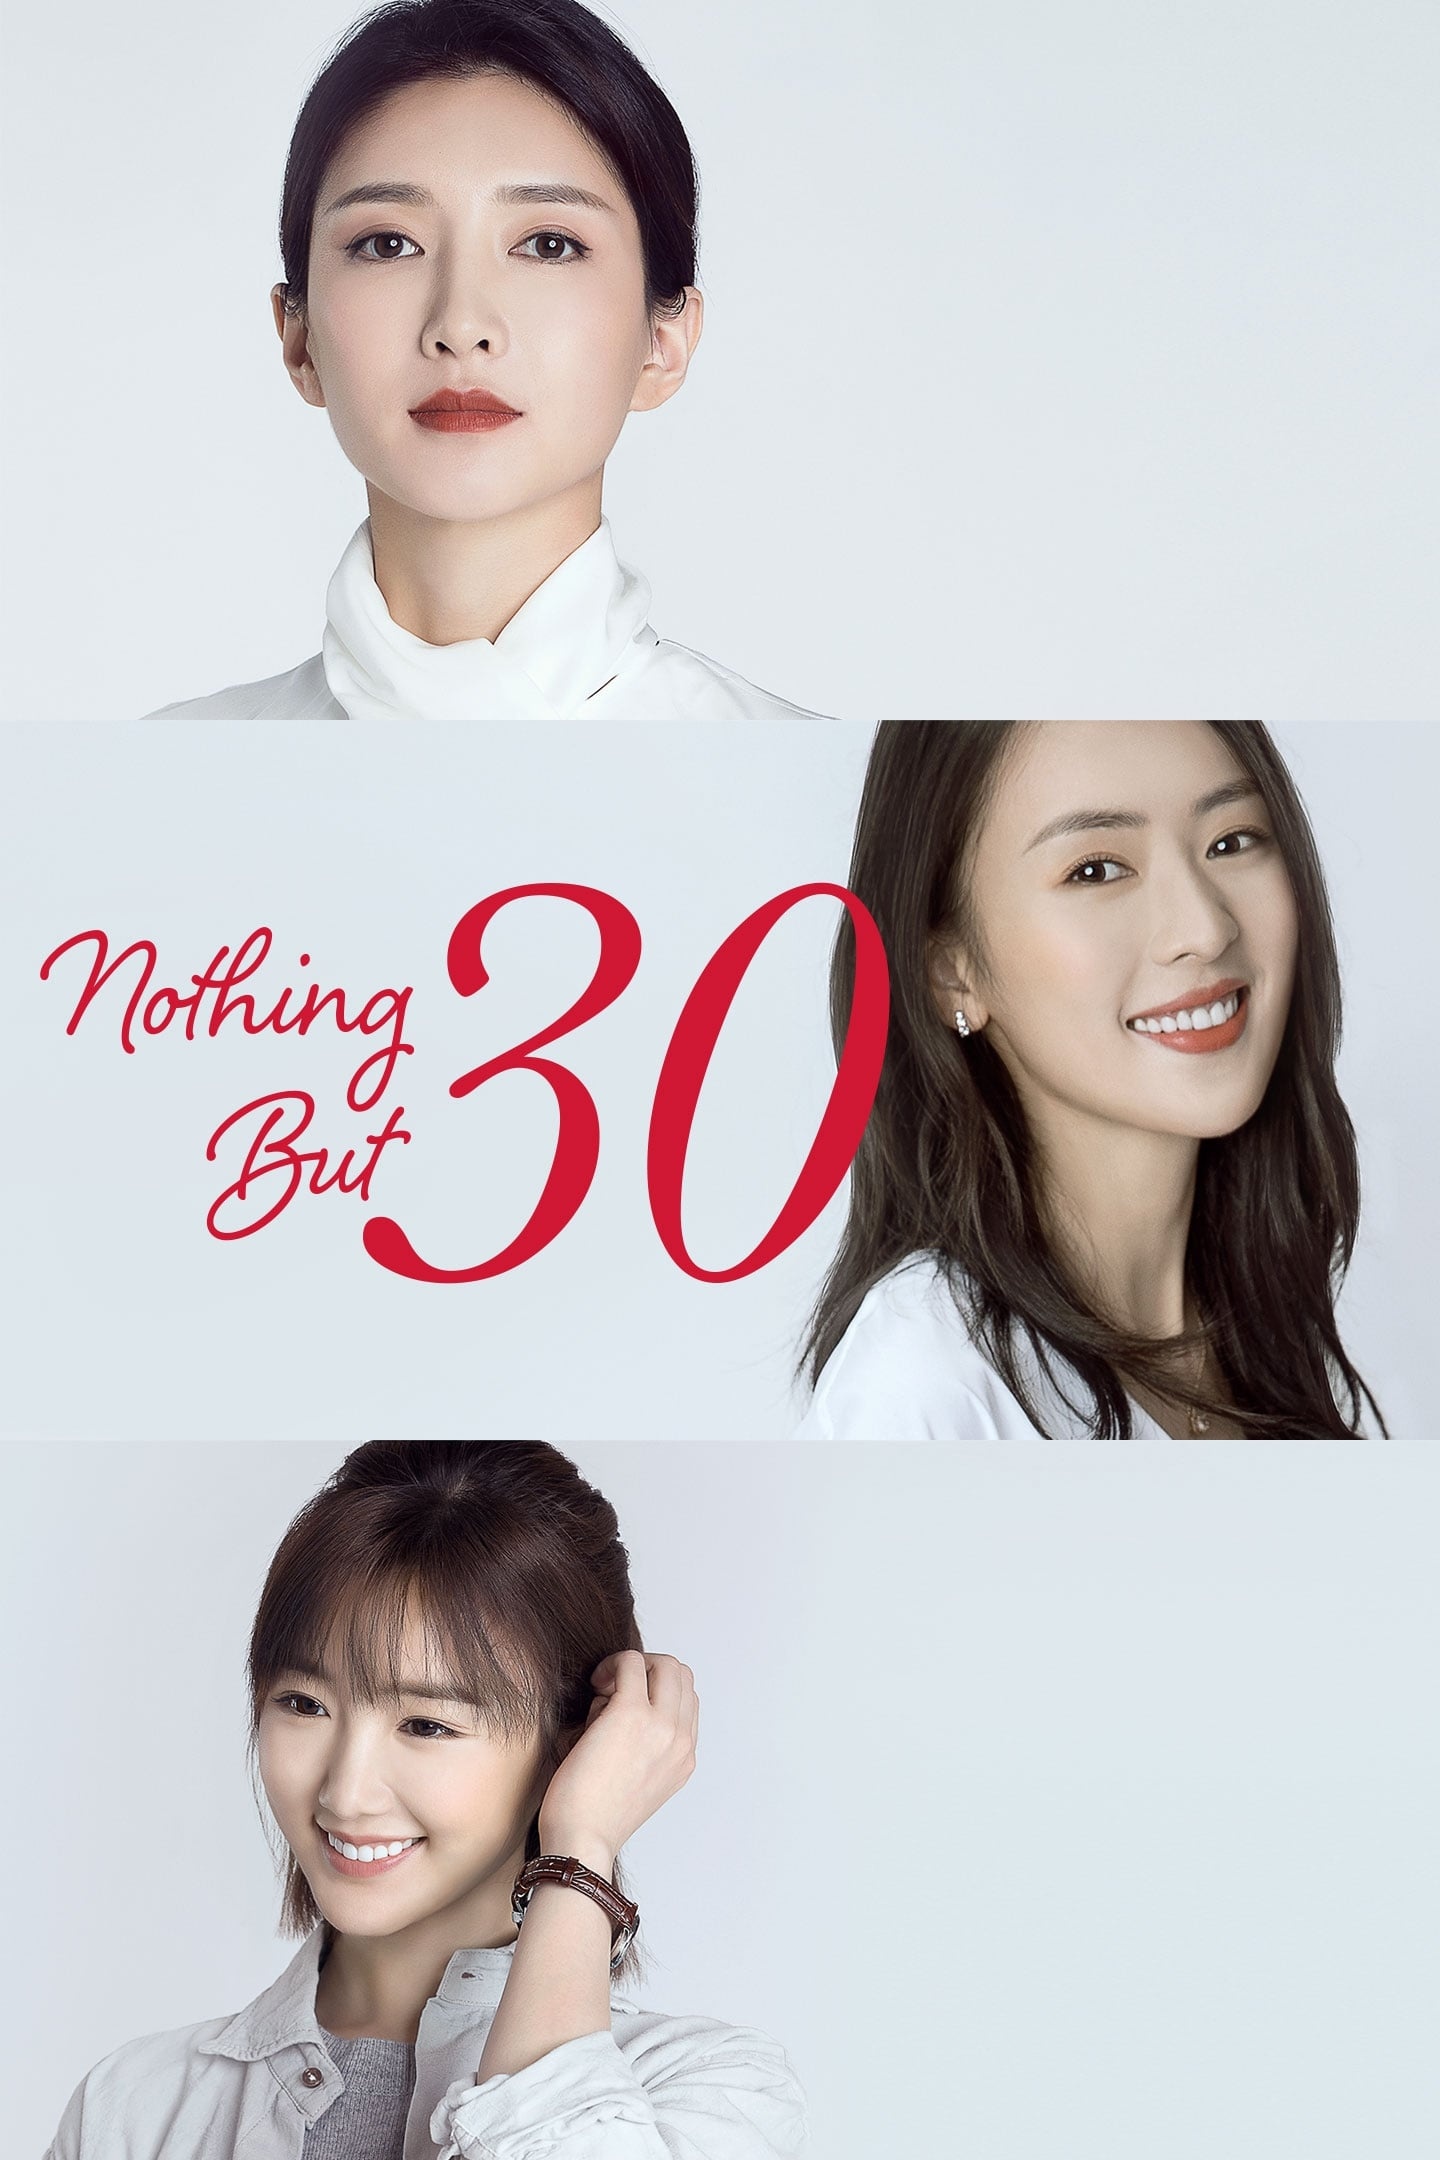 Nothing But Thirty, Yang Lixin movies, Actress biography, Empowered women, 1440x2160 HD Handy